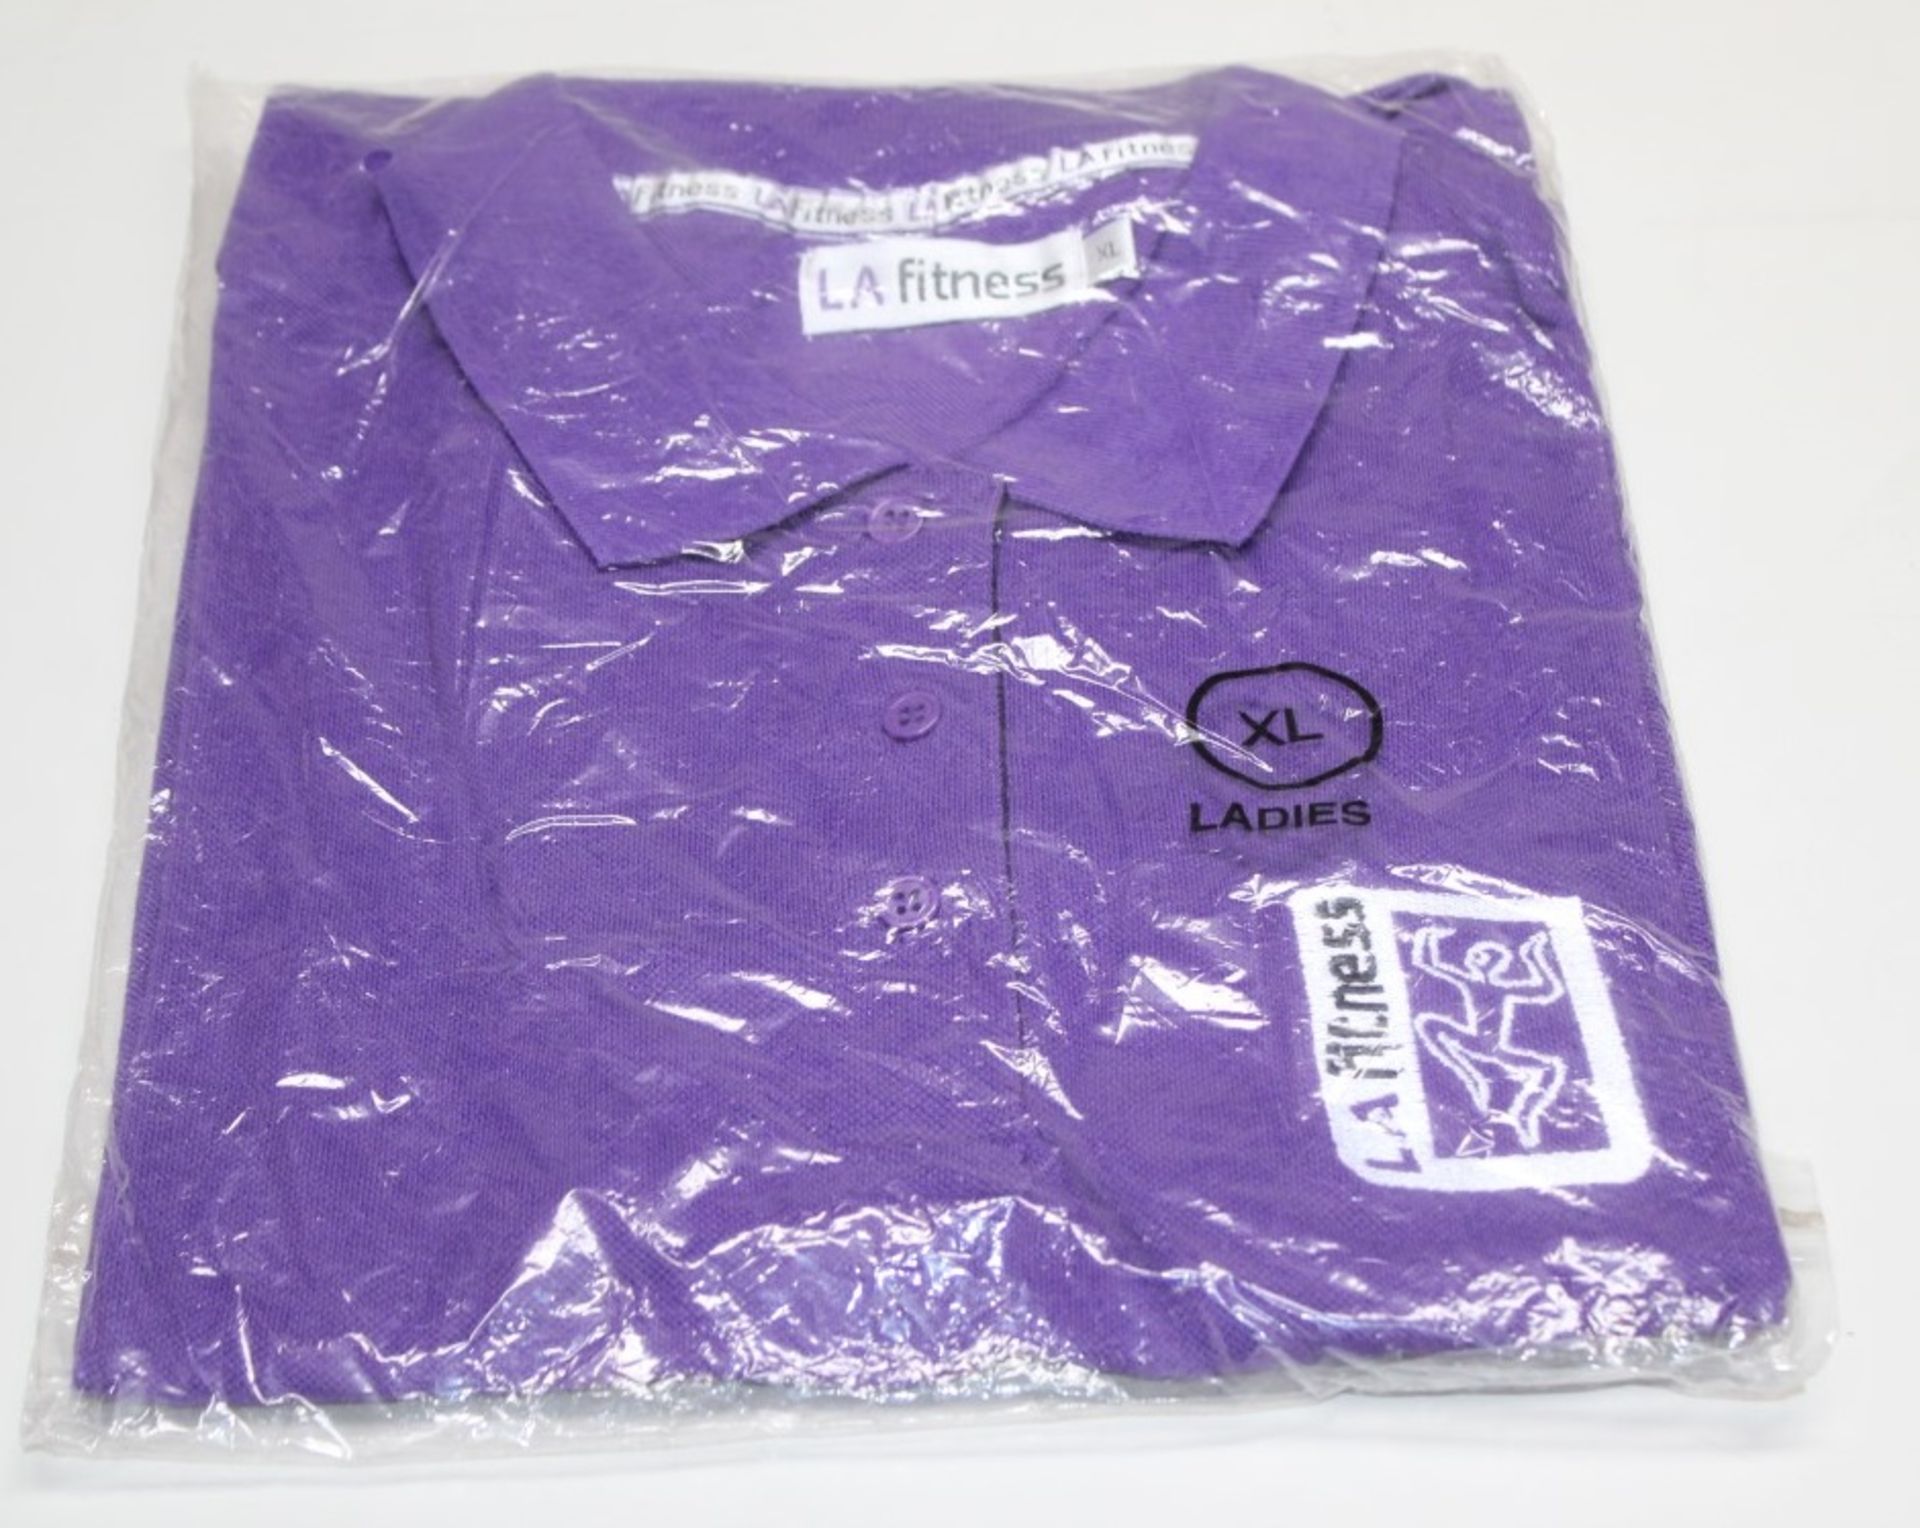 23 x LA FITNESS Branded Ladies Polo Shirts - All X-Large - Colour: Purple / Black - New & Sealed - Image 2 of 4